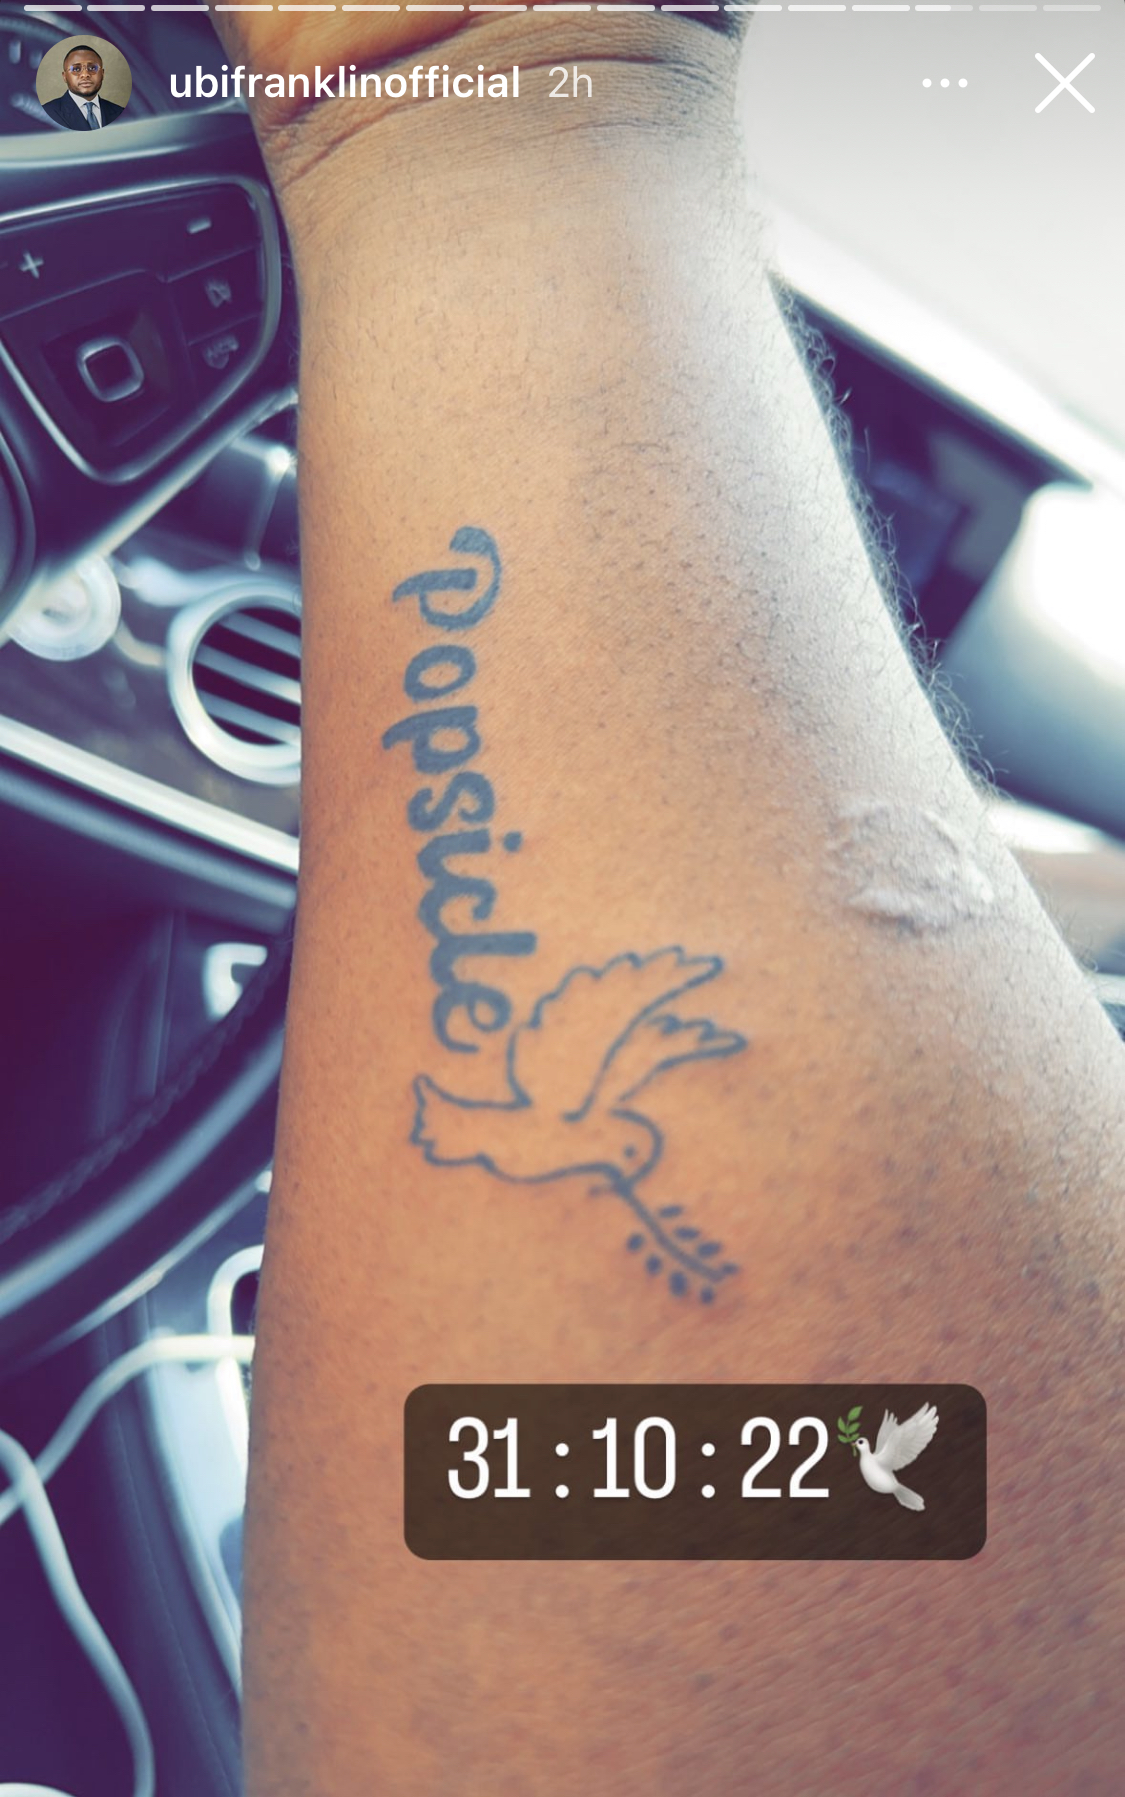 Ubi Franklin pays Tribute to Davido’s Late Son Ifeanyi with Tattoo of him [photos]